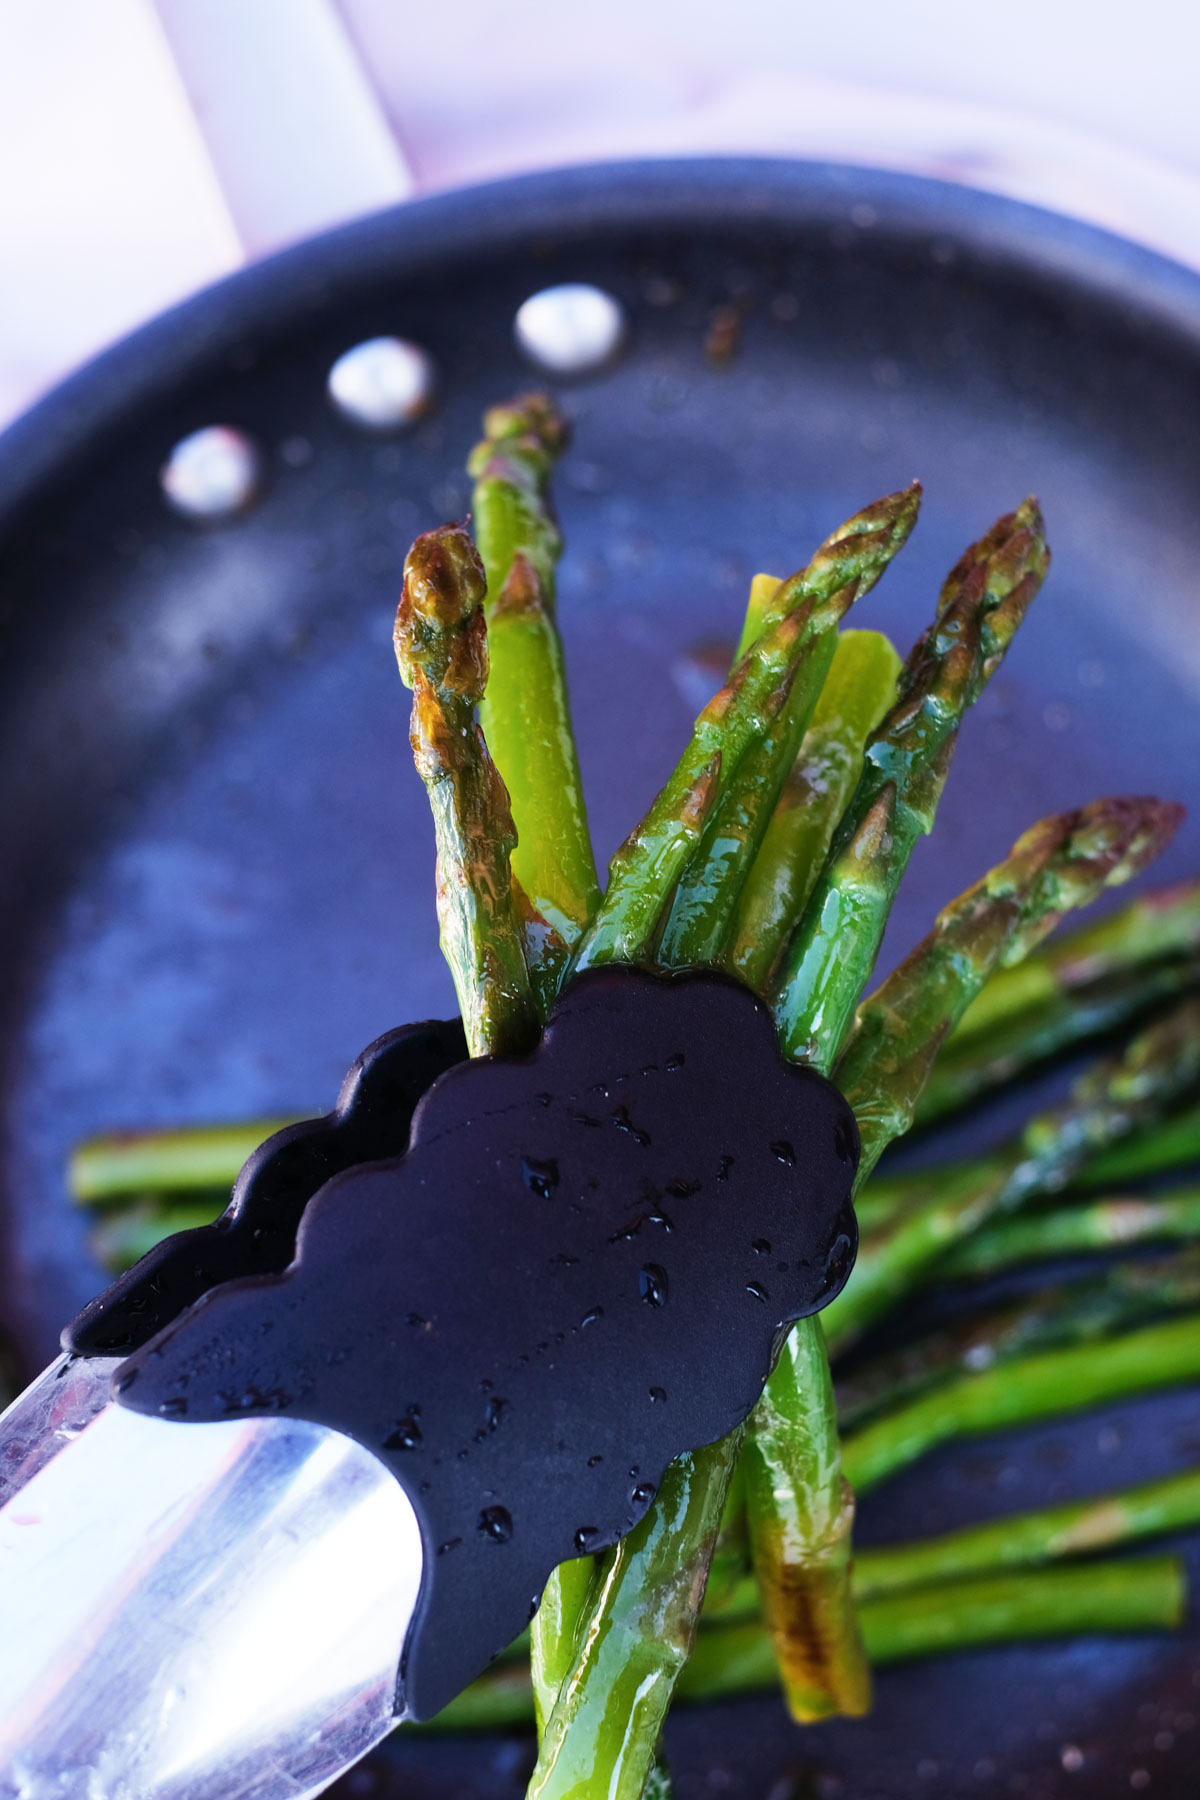 close up view of tongs removing cooked frozen asparagus from a skillet